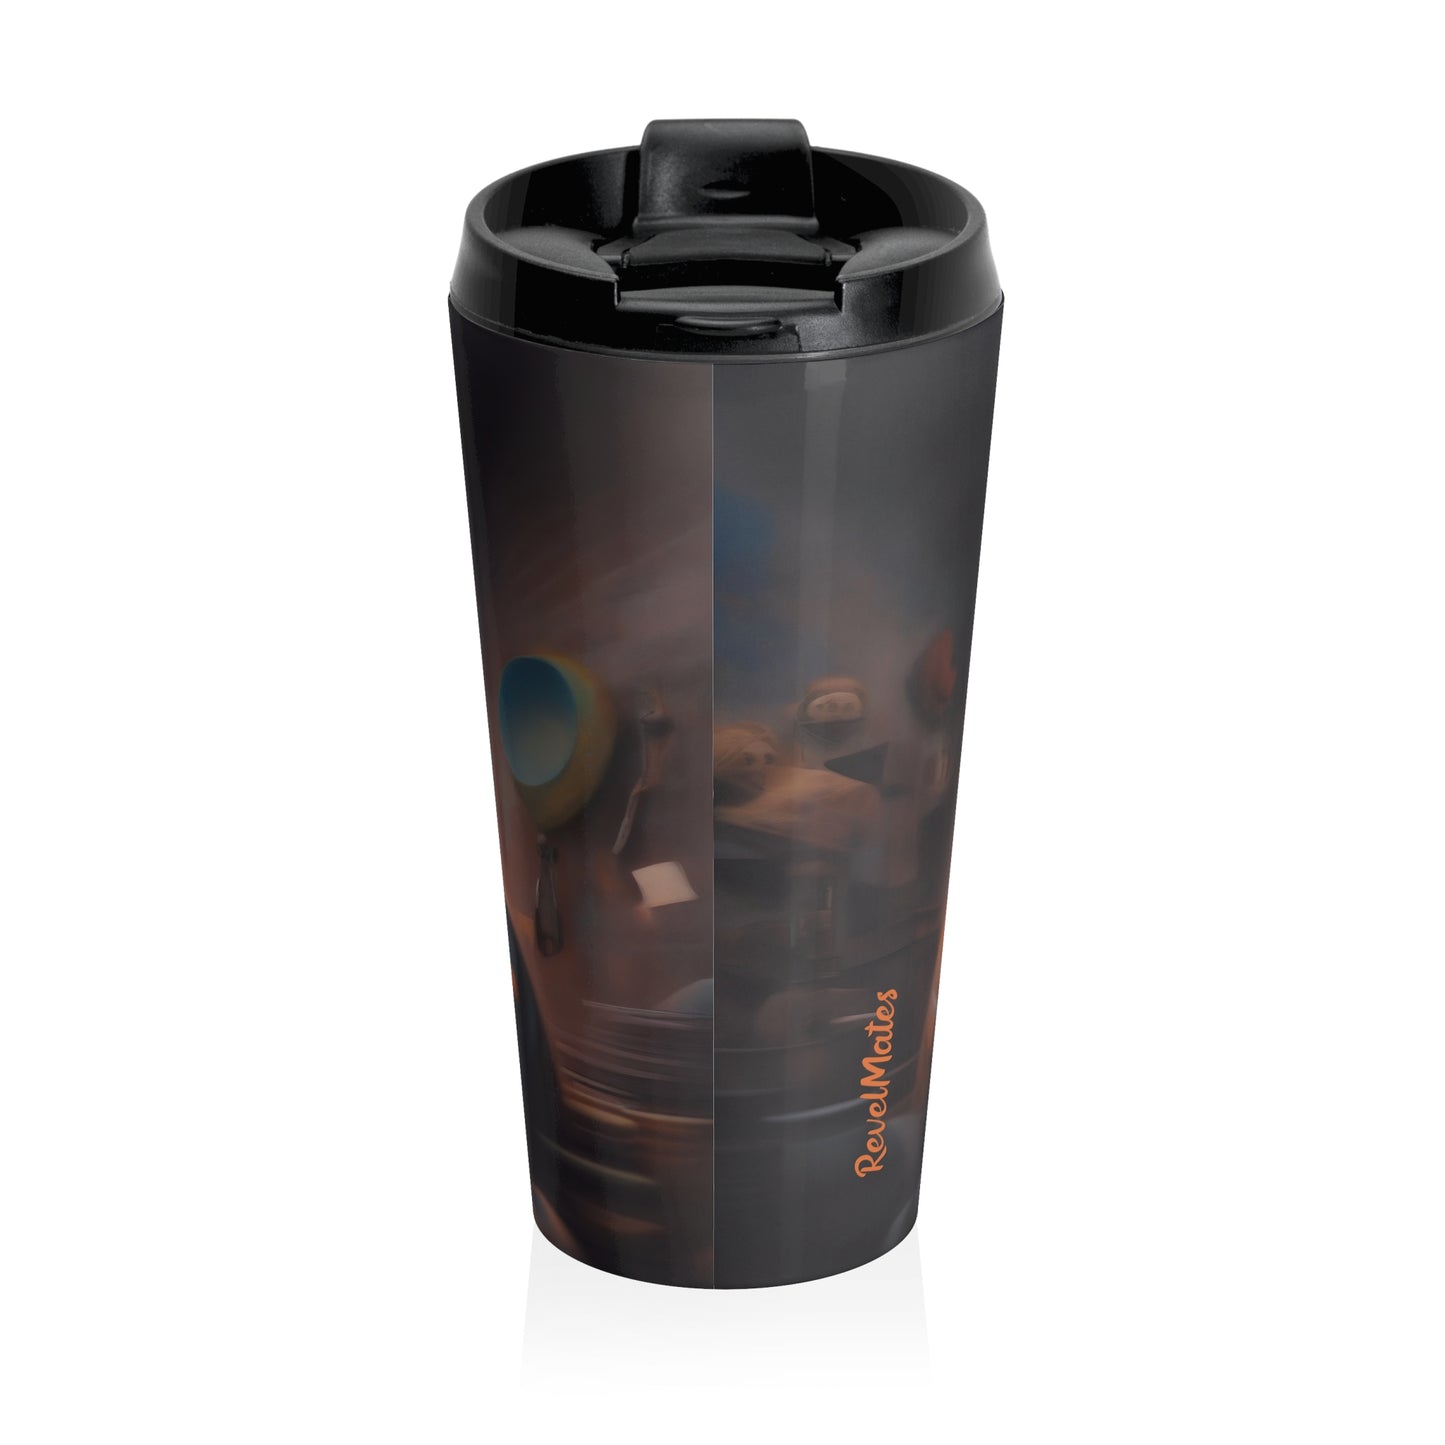 Stainless Steel Travel Mug With Cup 15oz (440ml) | Hip-Hop Brothers Design